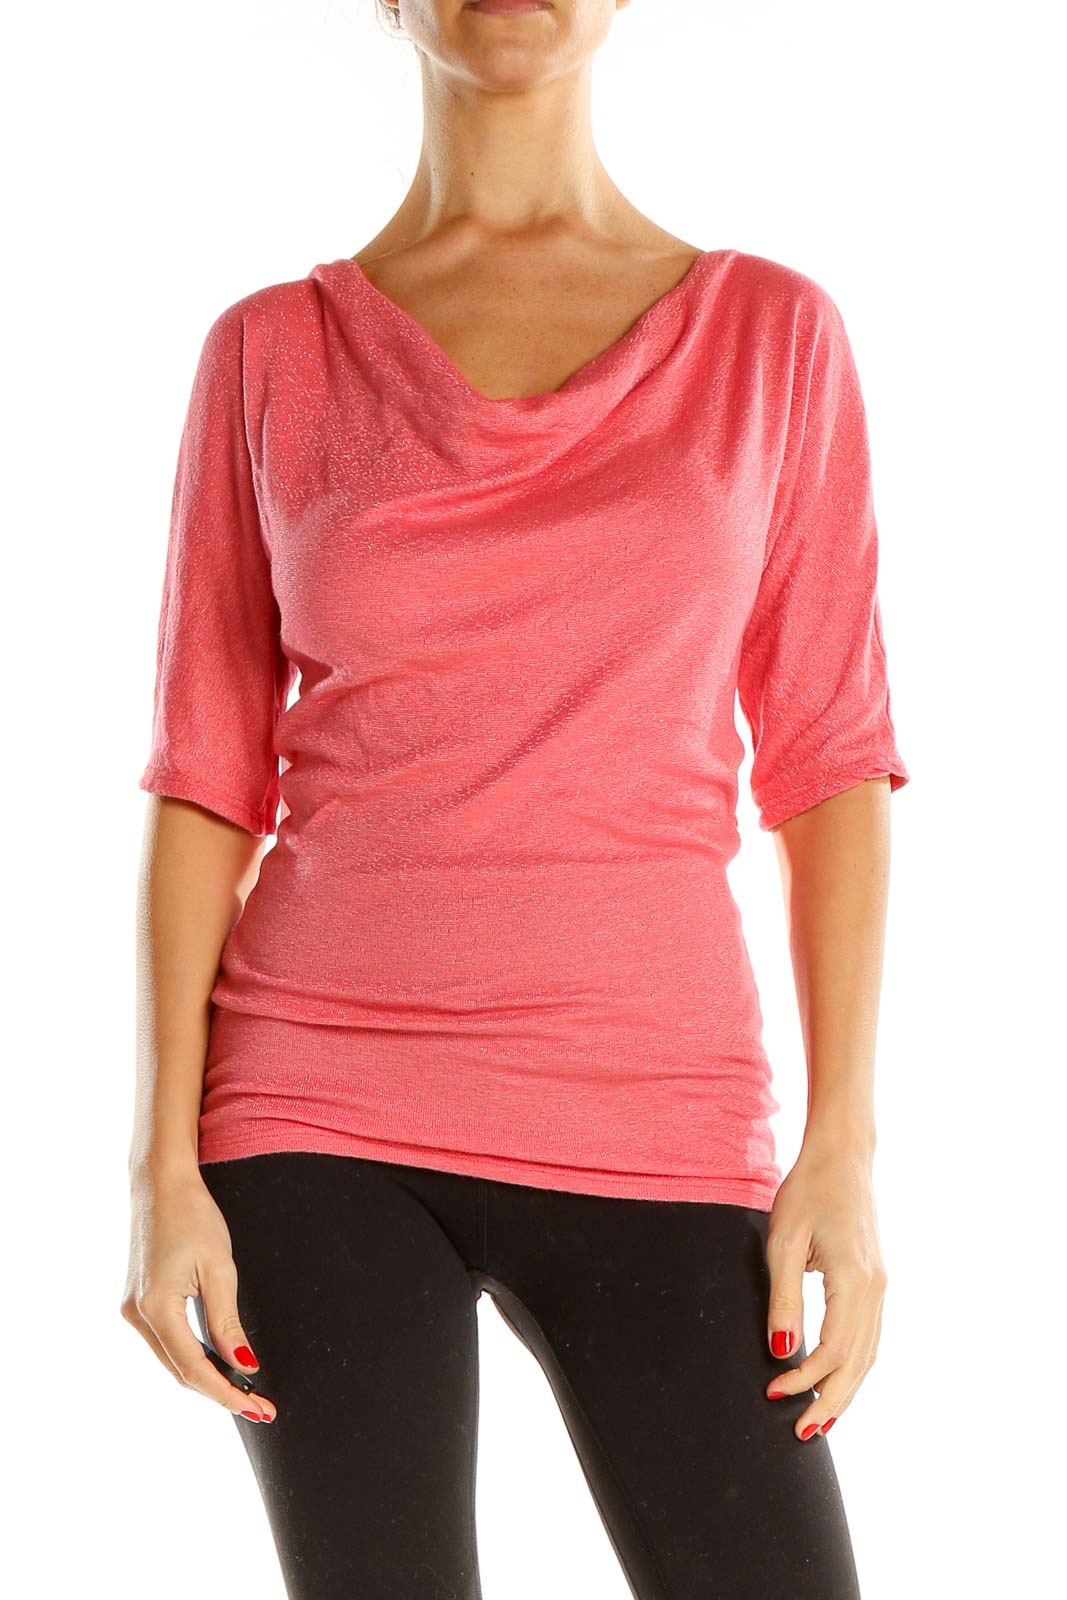 Pink Retro Cowl Neck Top Front